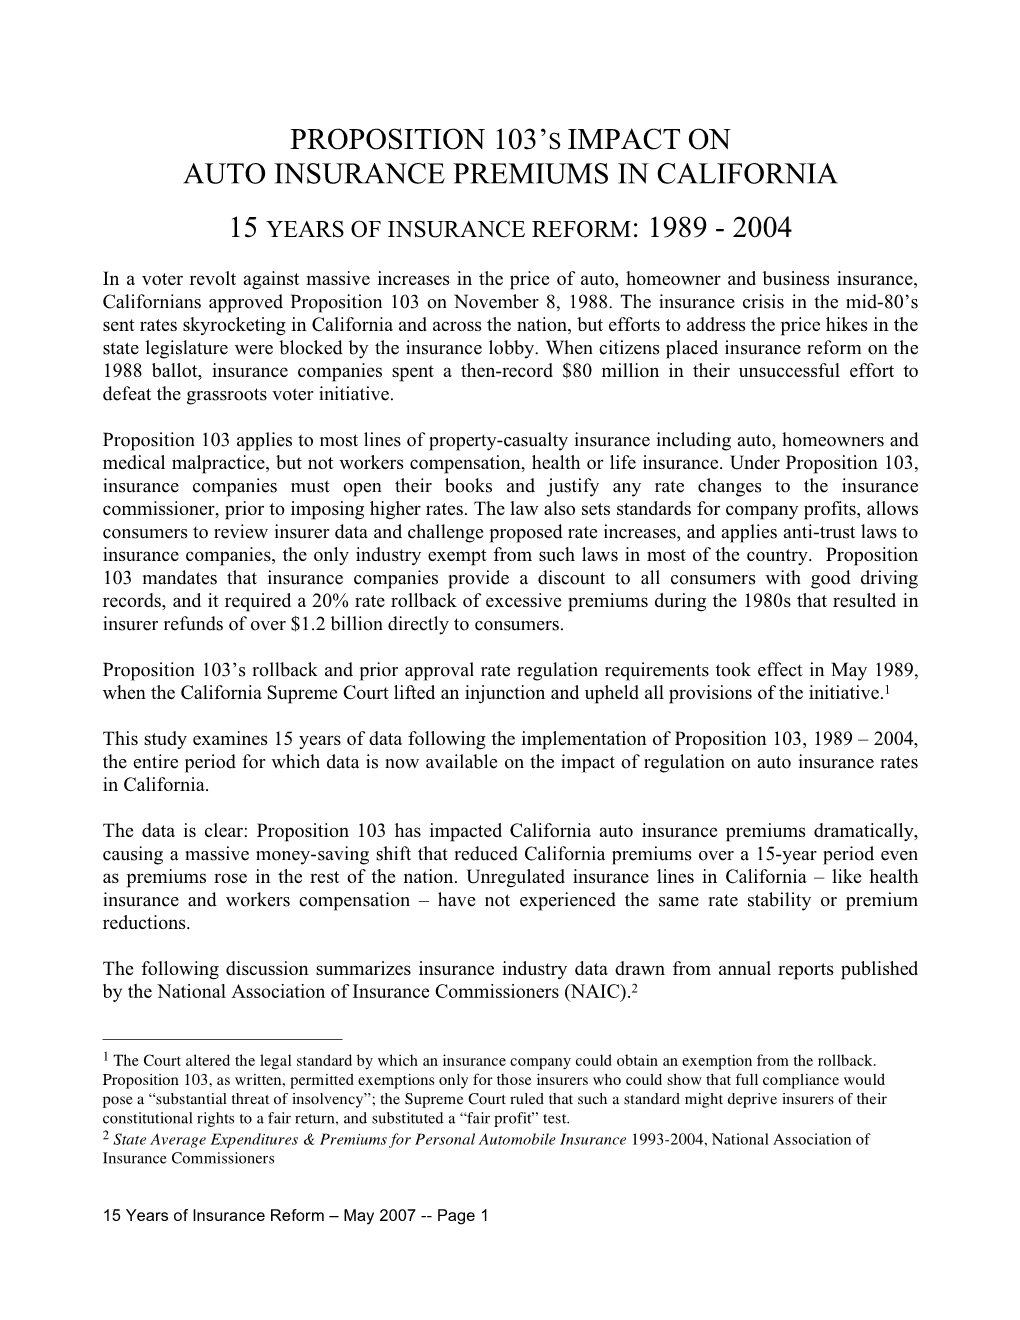 Proposition 103'S Impact on Auto Insurance Premiums in California